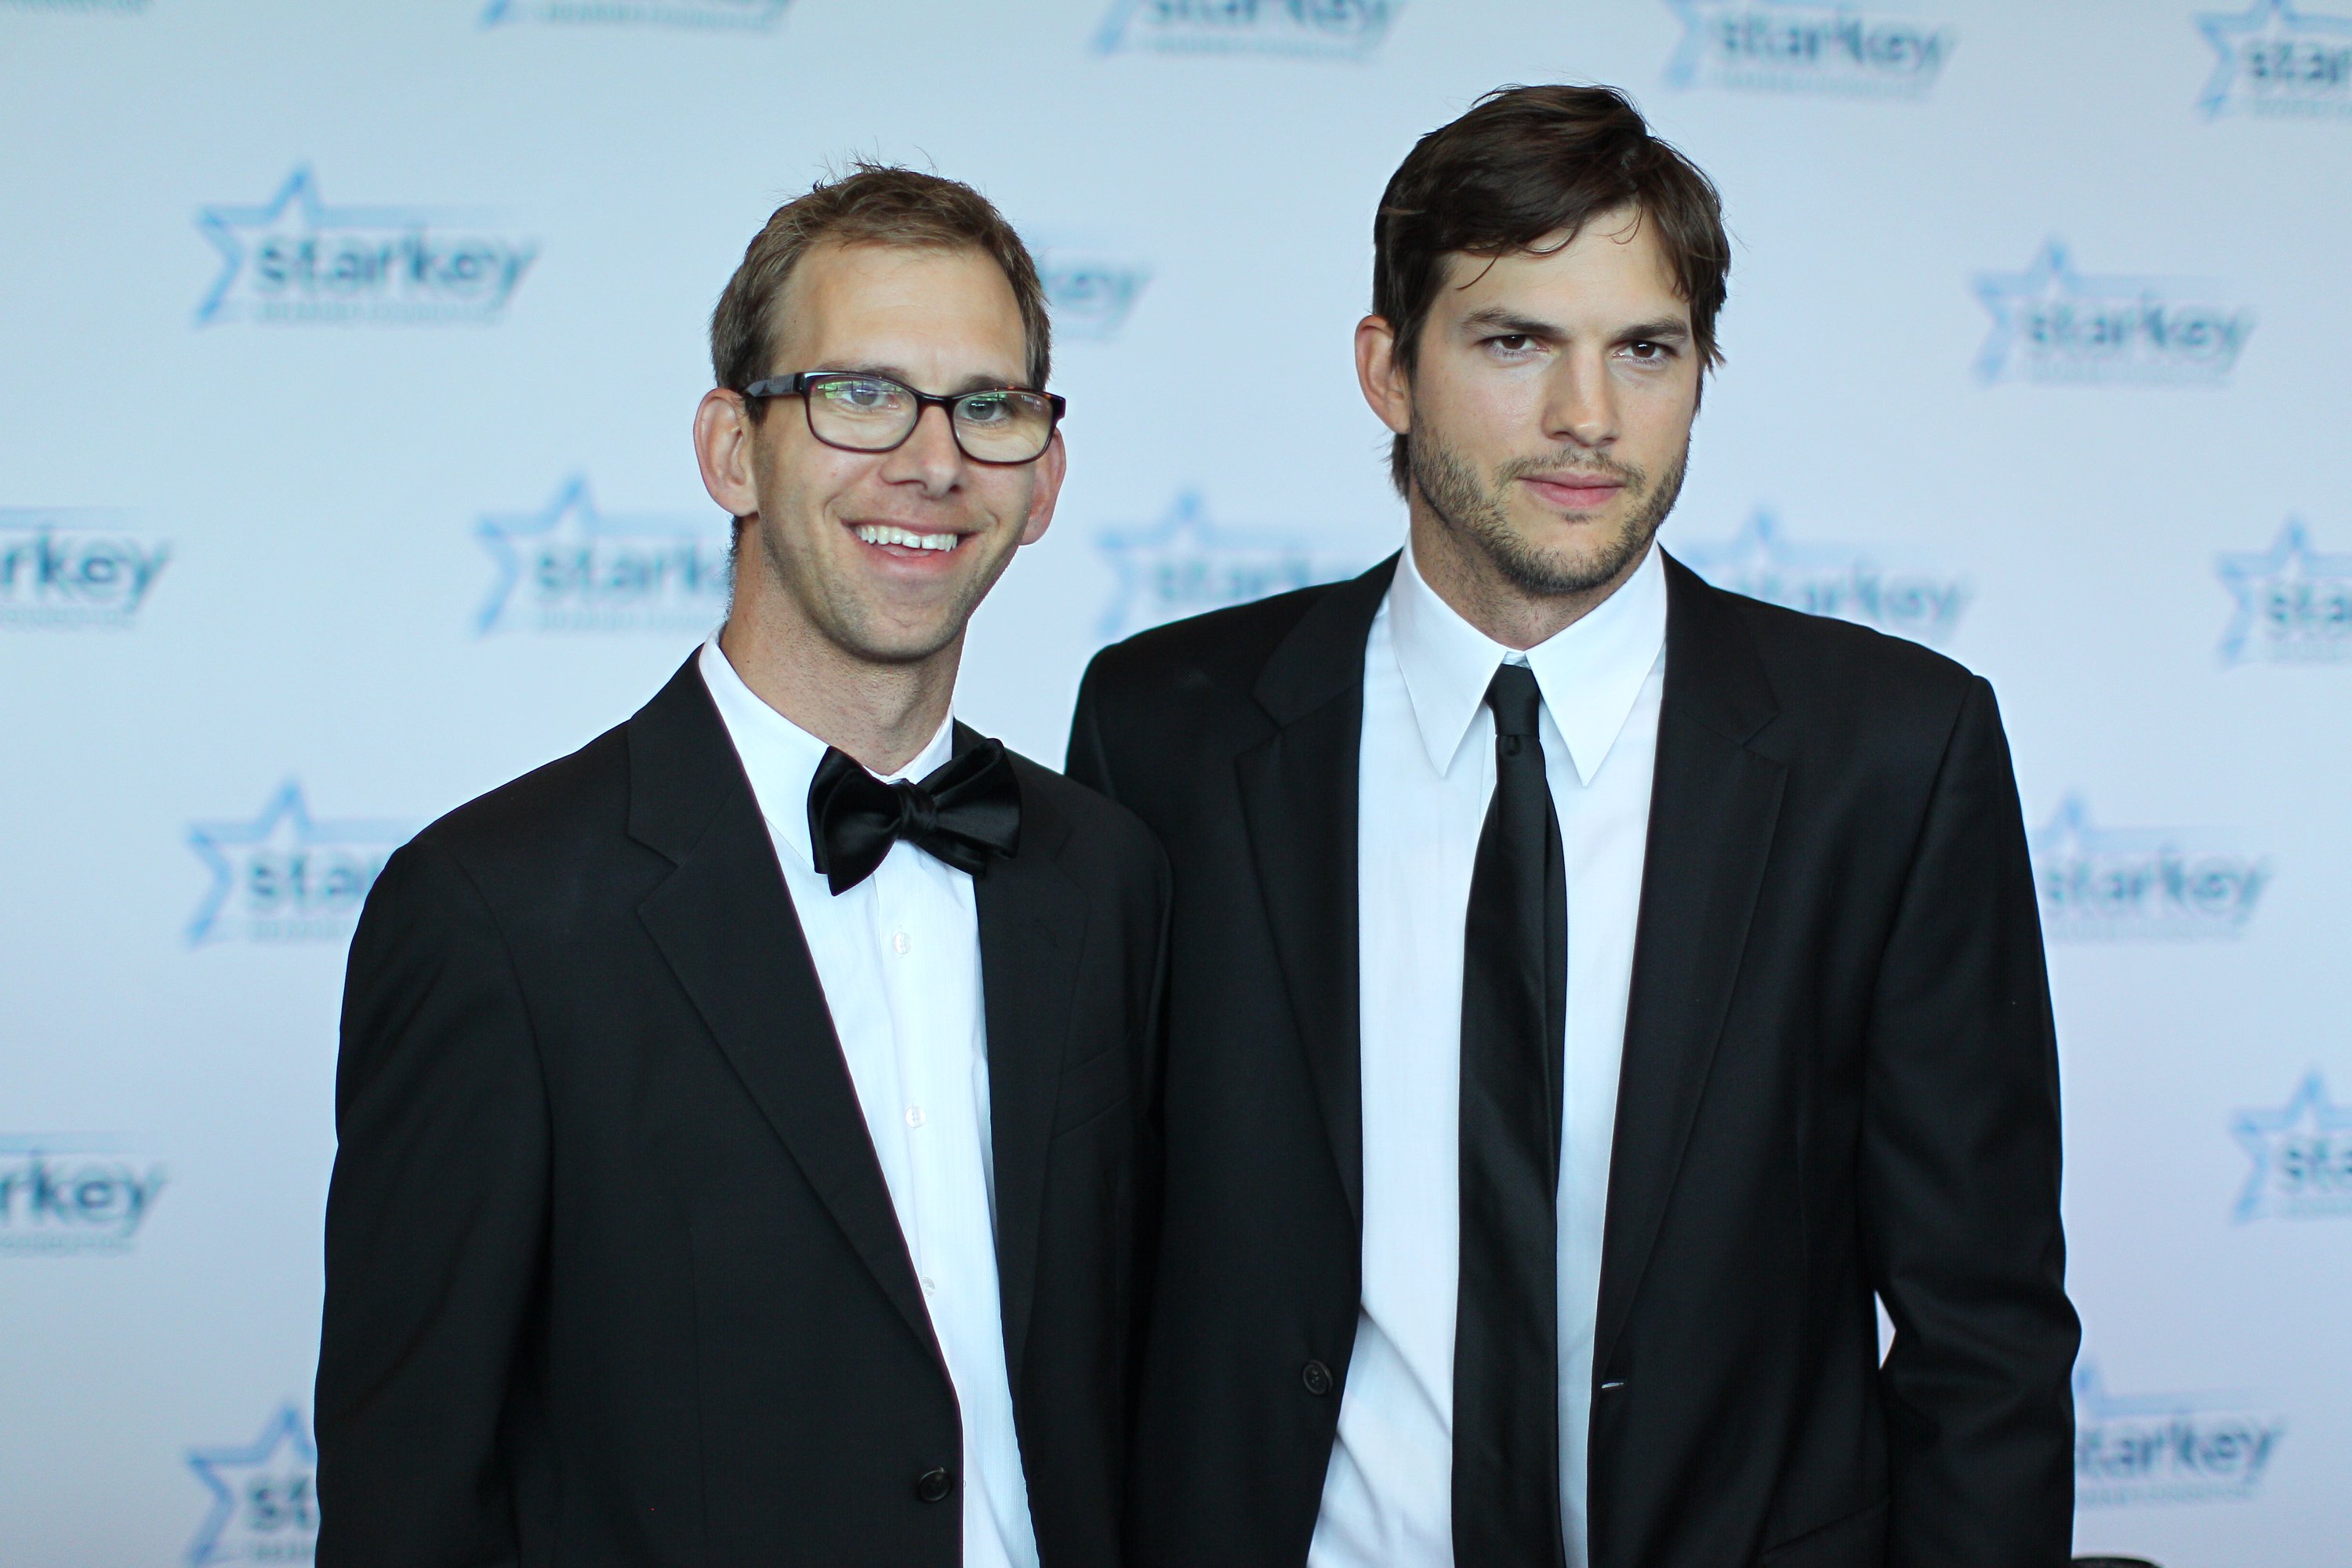 Ashton Kutcher and his brother Michael Kutcher in Minnesota in 2013 | Source: Getty Images  